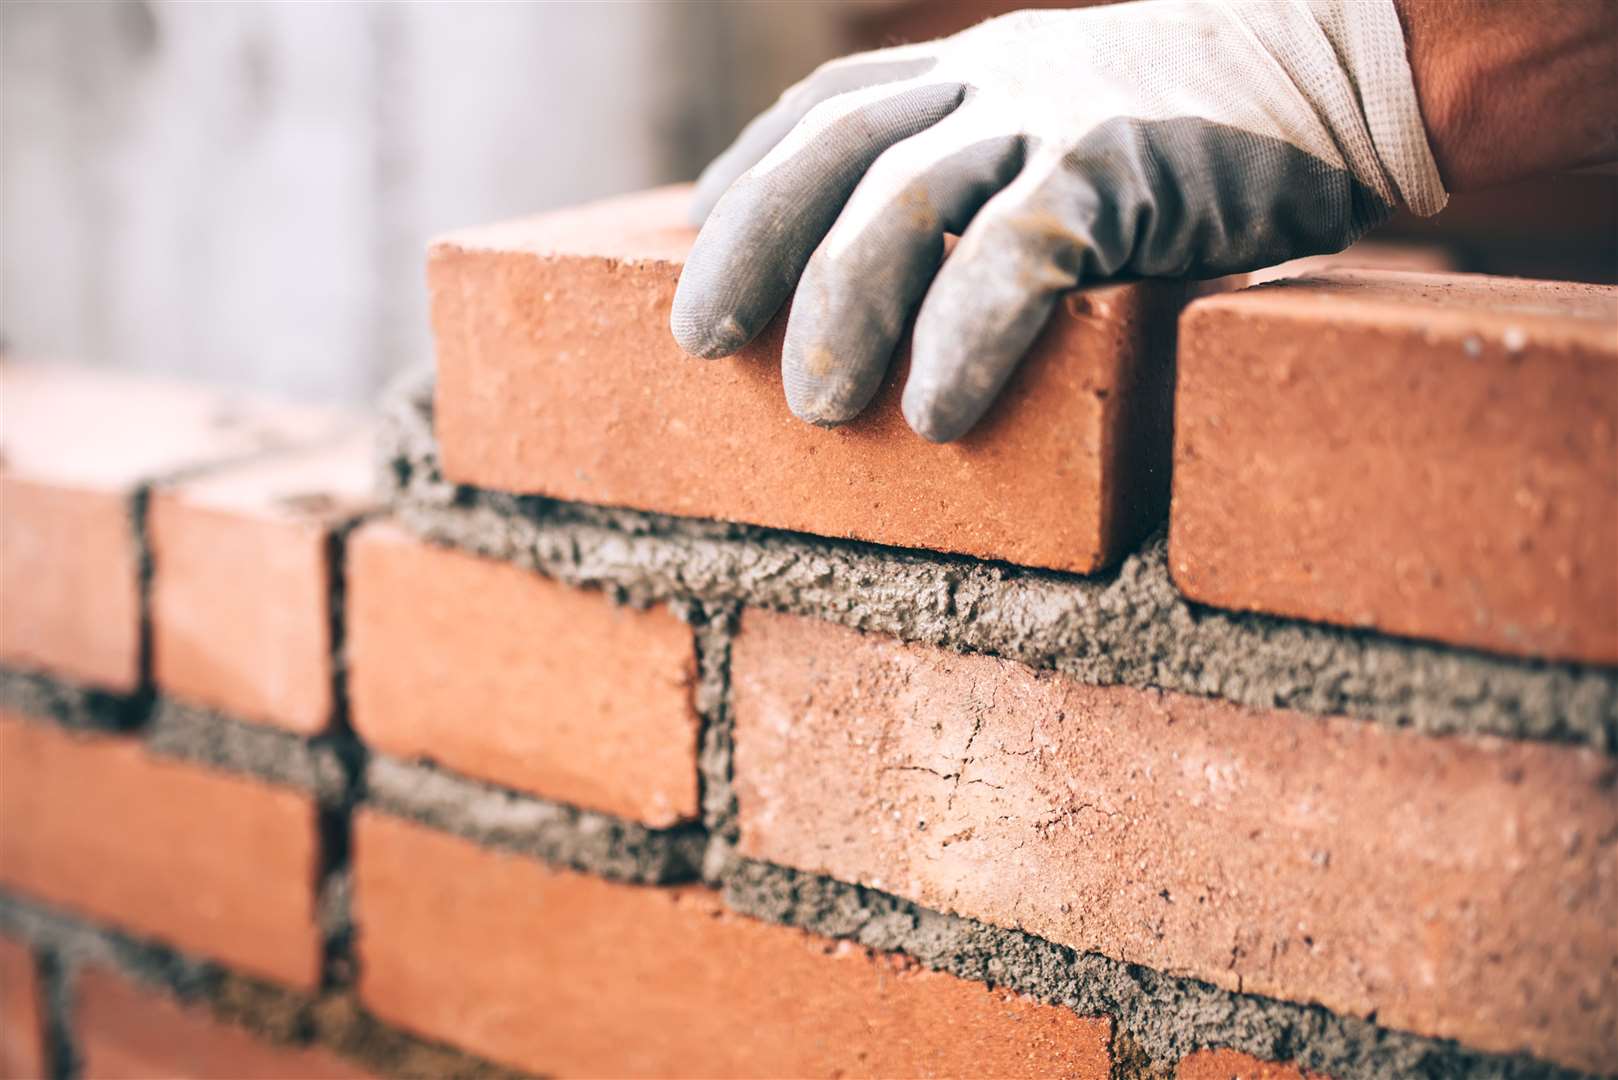 House building is set to become an even bigger issue in Kent Picture: Bogdanhoda/iStock